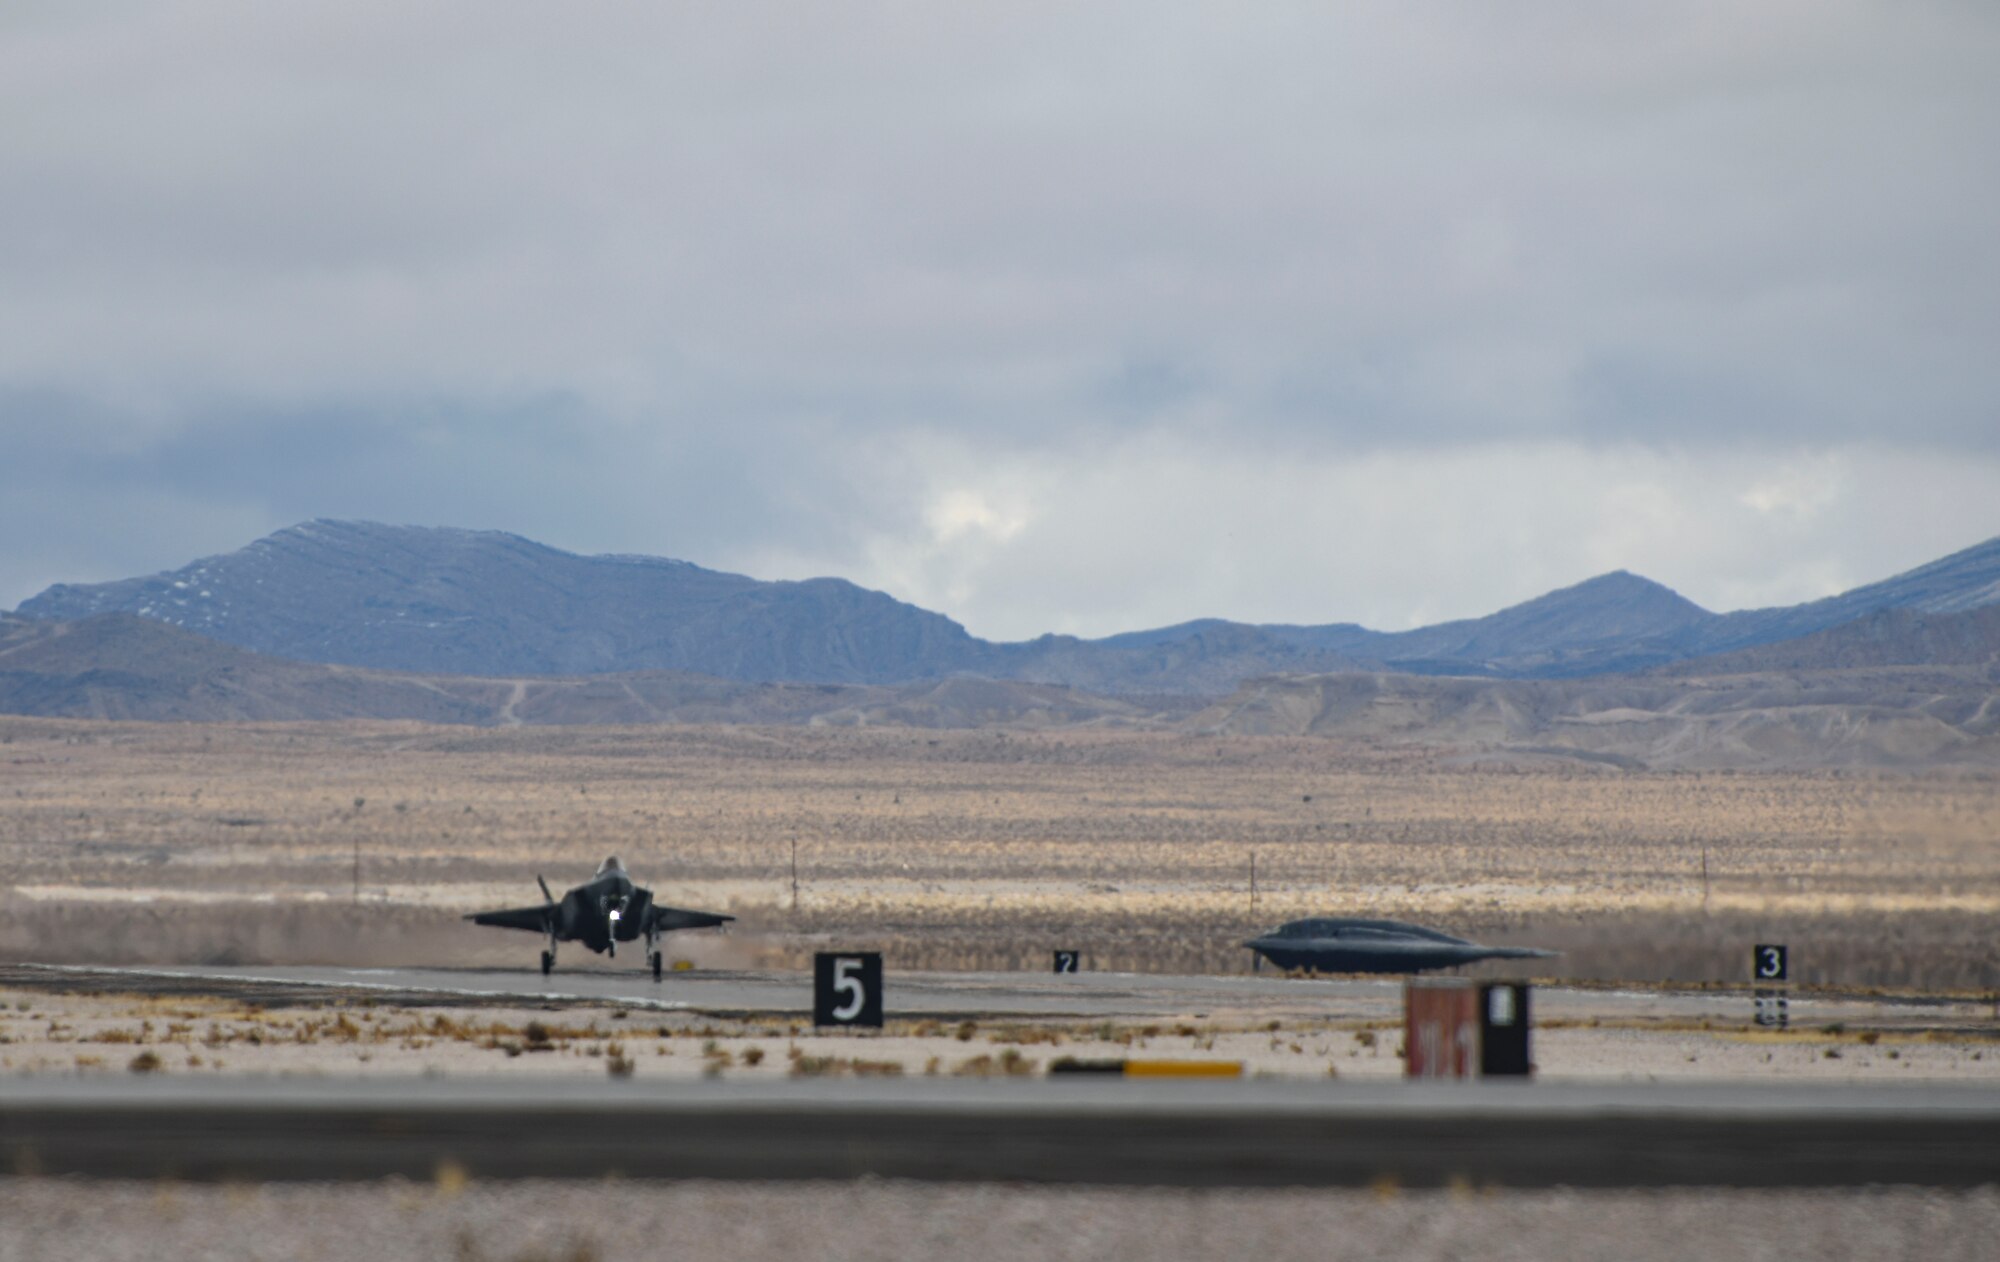 An F-35 Lightning II lands at Nellis Air Force Base, Nevada, Jan. 26, 2021. During Red Flag 21-1, the 393rd Expeditionary Bomb Squadron flew B-2 Spirit Stealth Bomber training mission with multiple aircraft in order to further enhance their experience for future sorties. (U.S. Air Force photo by Staff Sgt. Sadie Colbert)